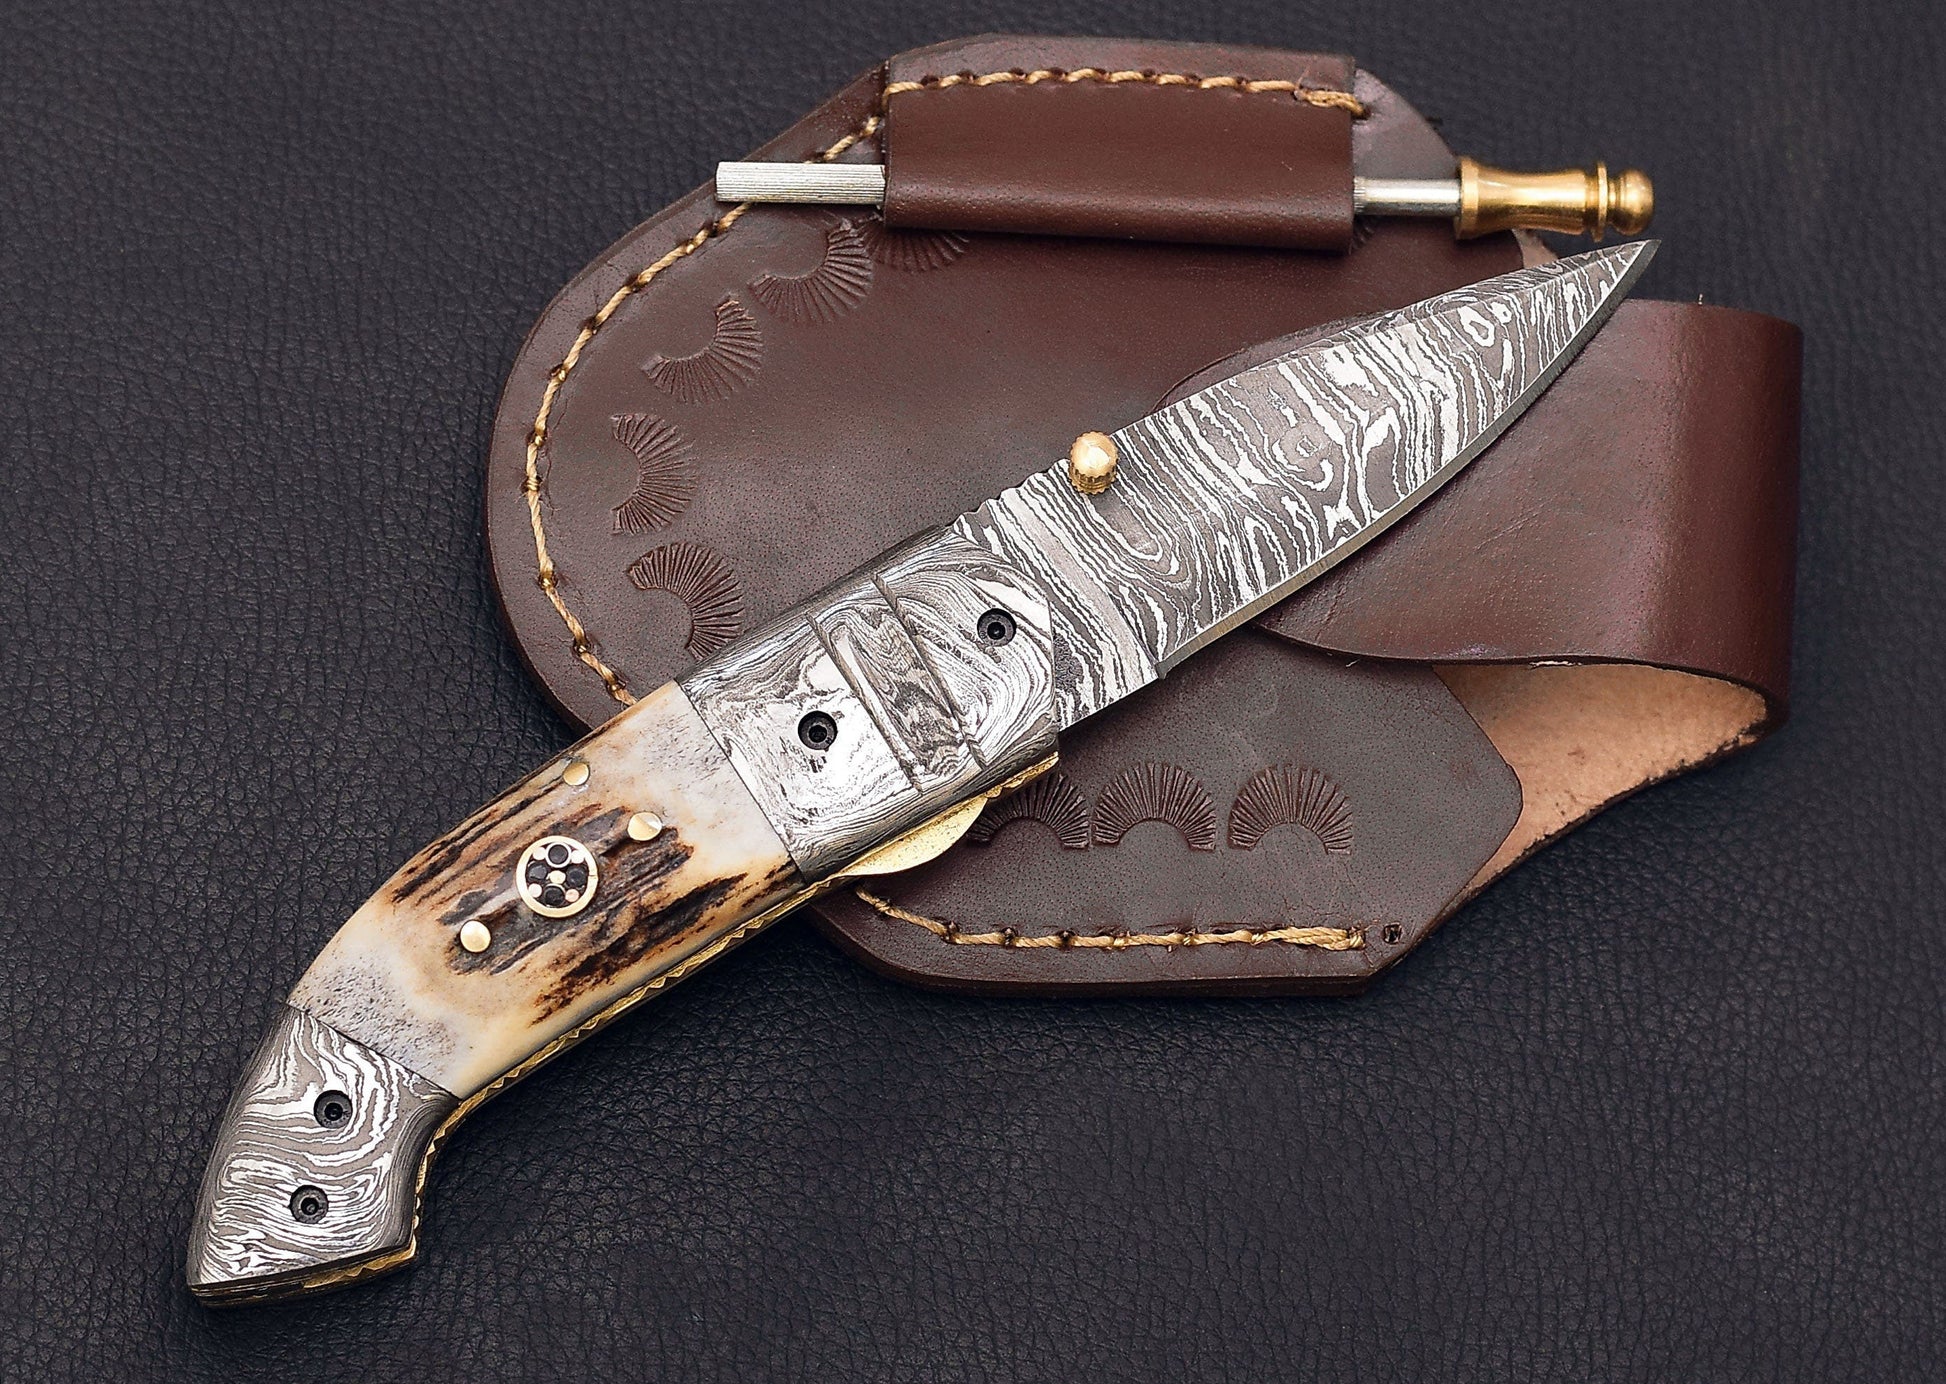 7.5" Hand Forged Damascus Steel folding knife with deer stag handle